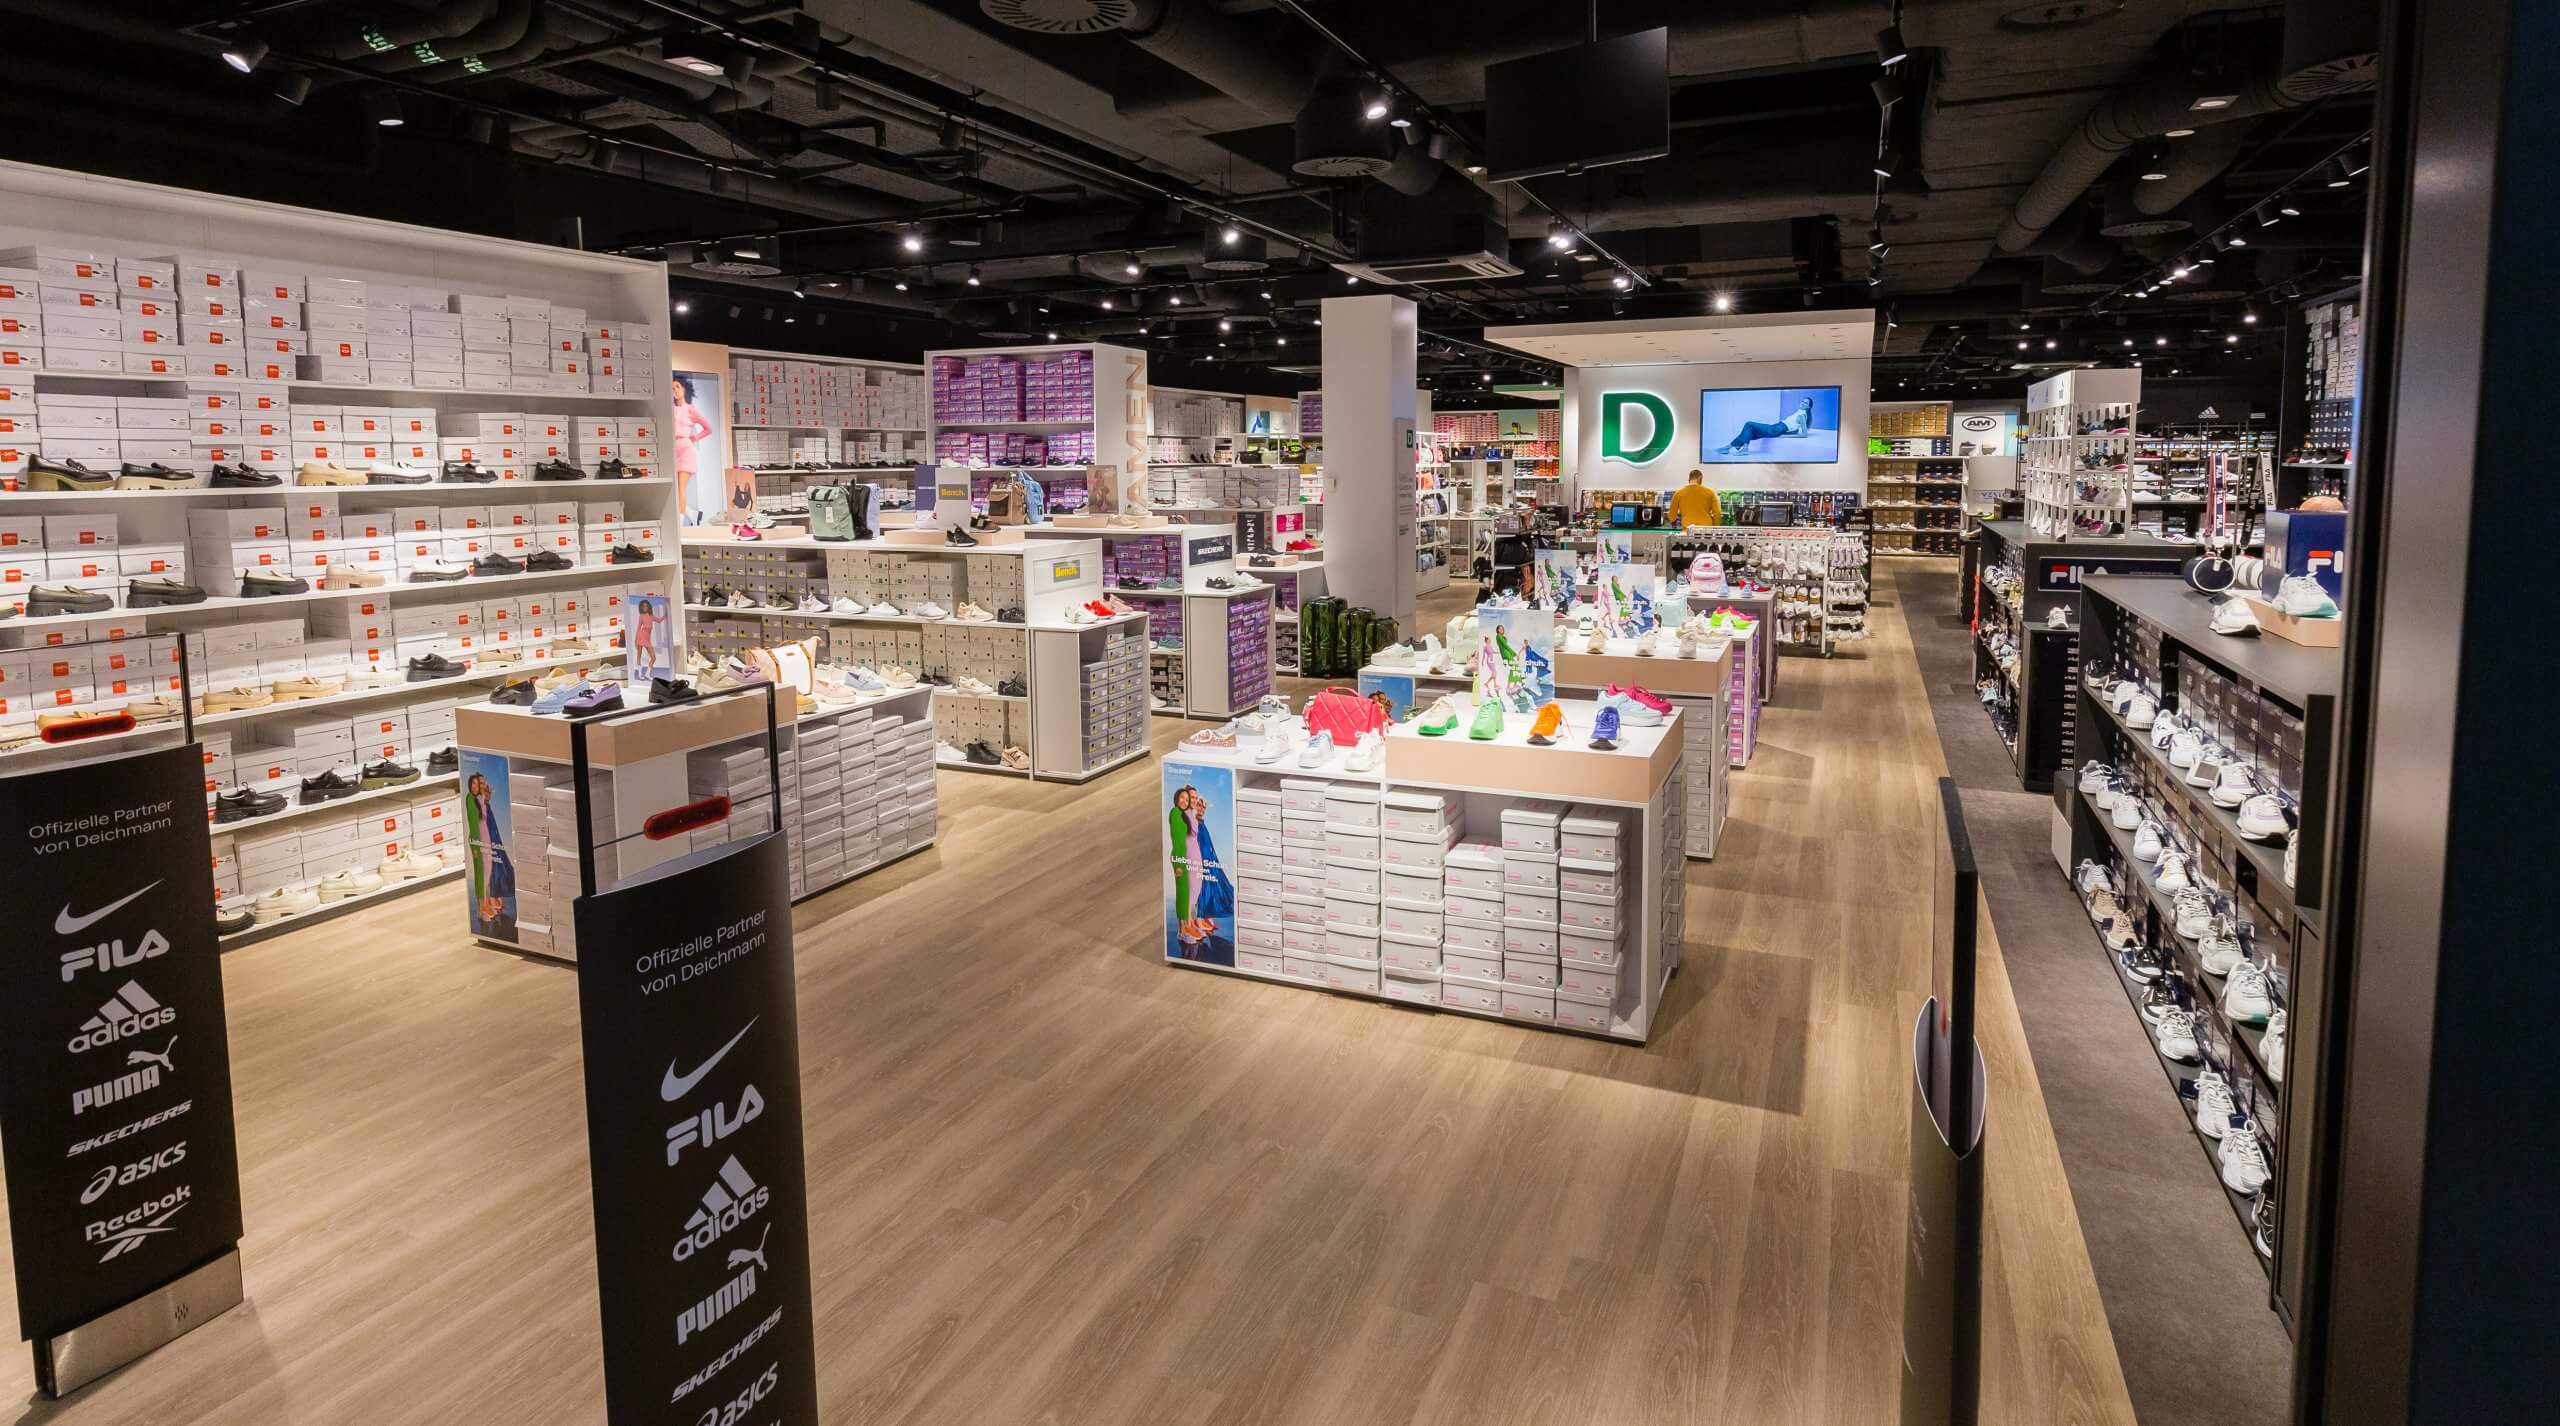 diskriminerende overskydende tand Record revenue: the DEICHMANN Group breaks the 8 billion euros revenue  barrierStrong growth at existing sales outlets, successful acquisitions and  major investments in the company's 110th year | Deichmann Deutschland